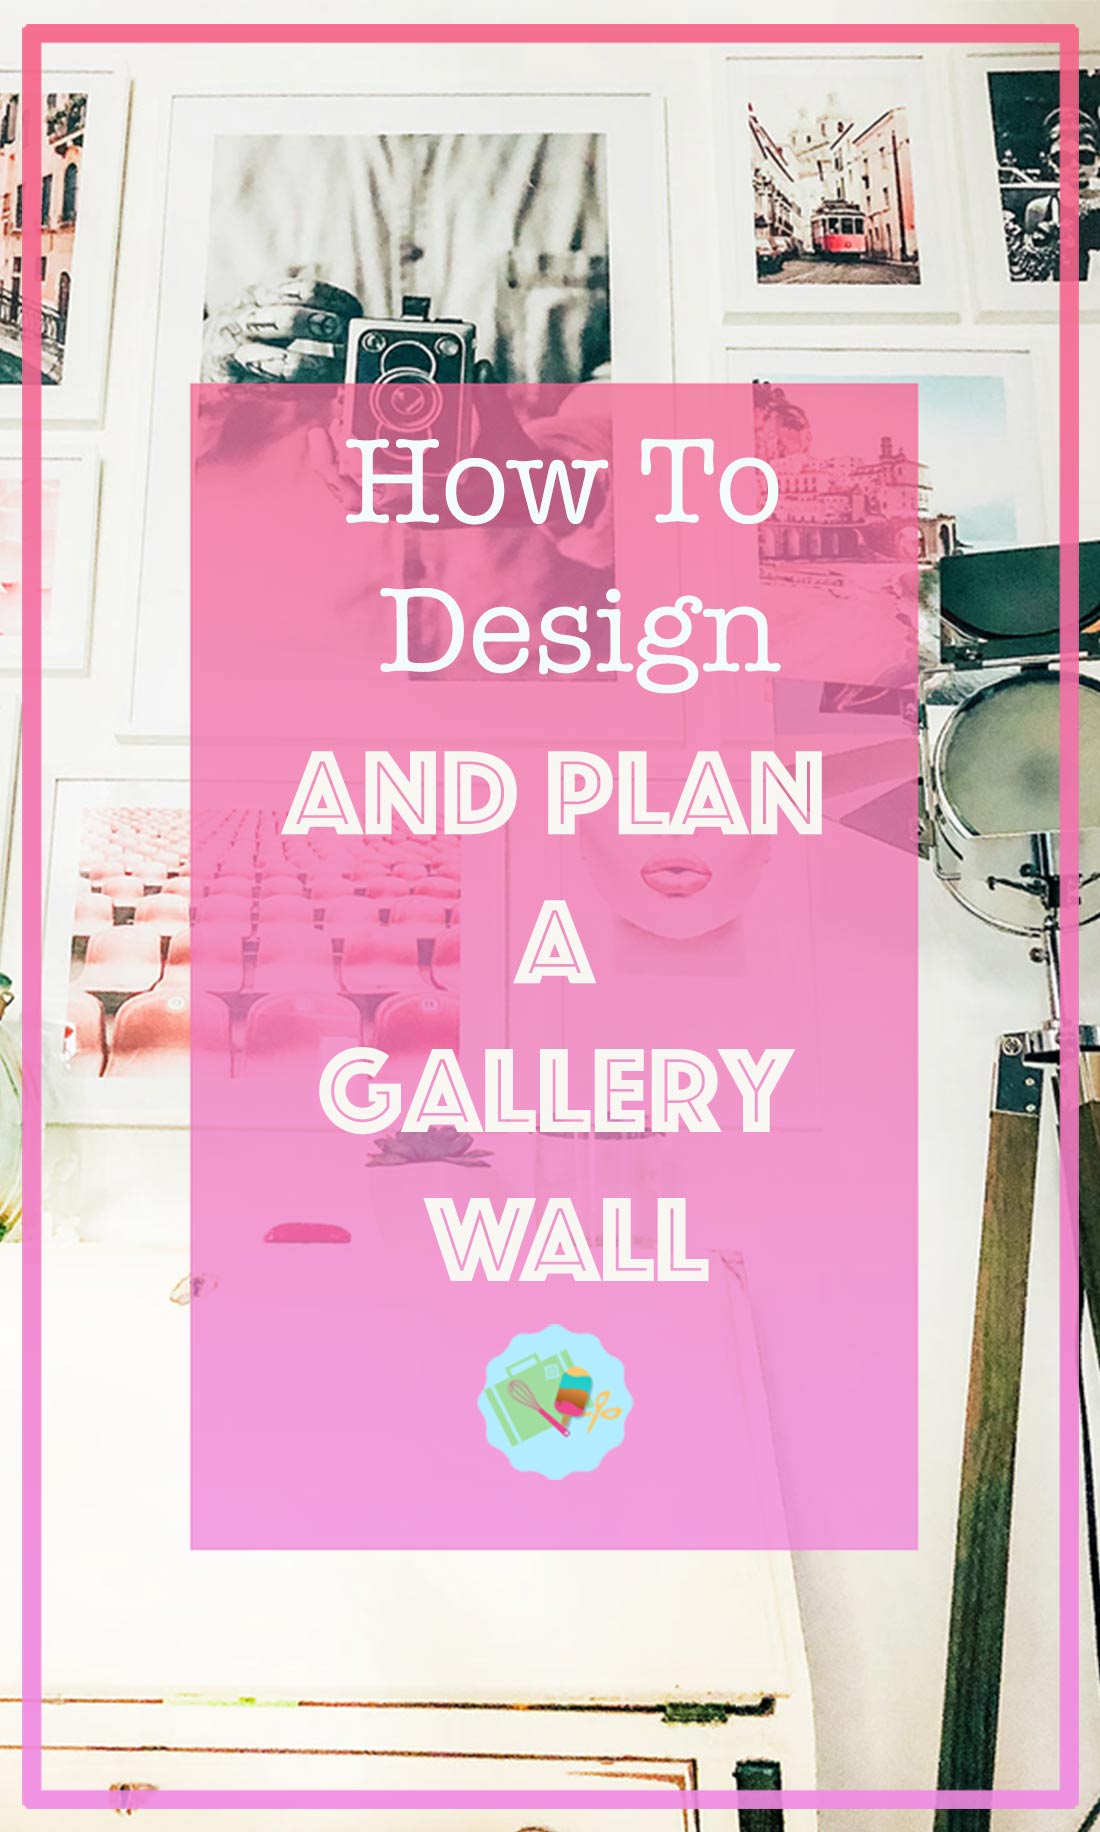 How to paln and design a Gallery Wall